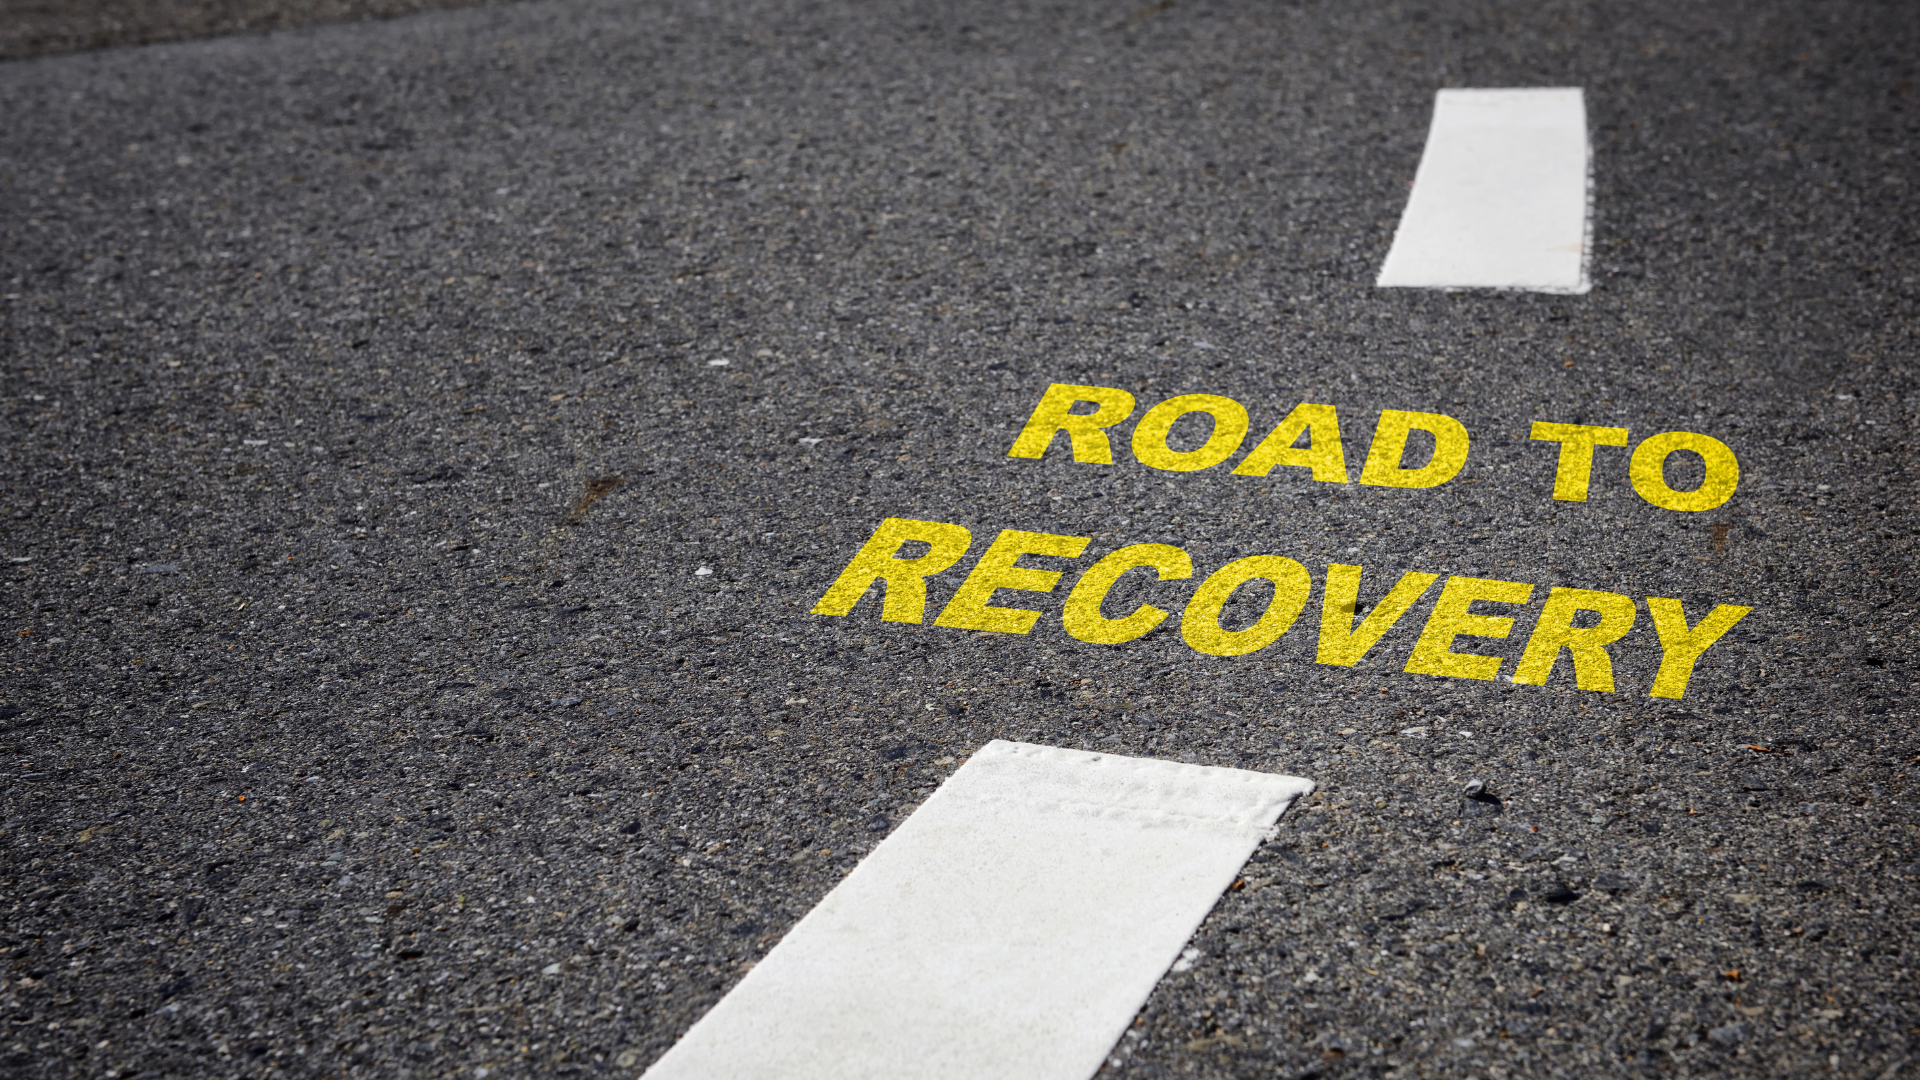 Road-recovery